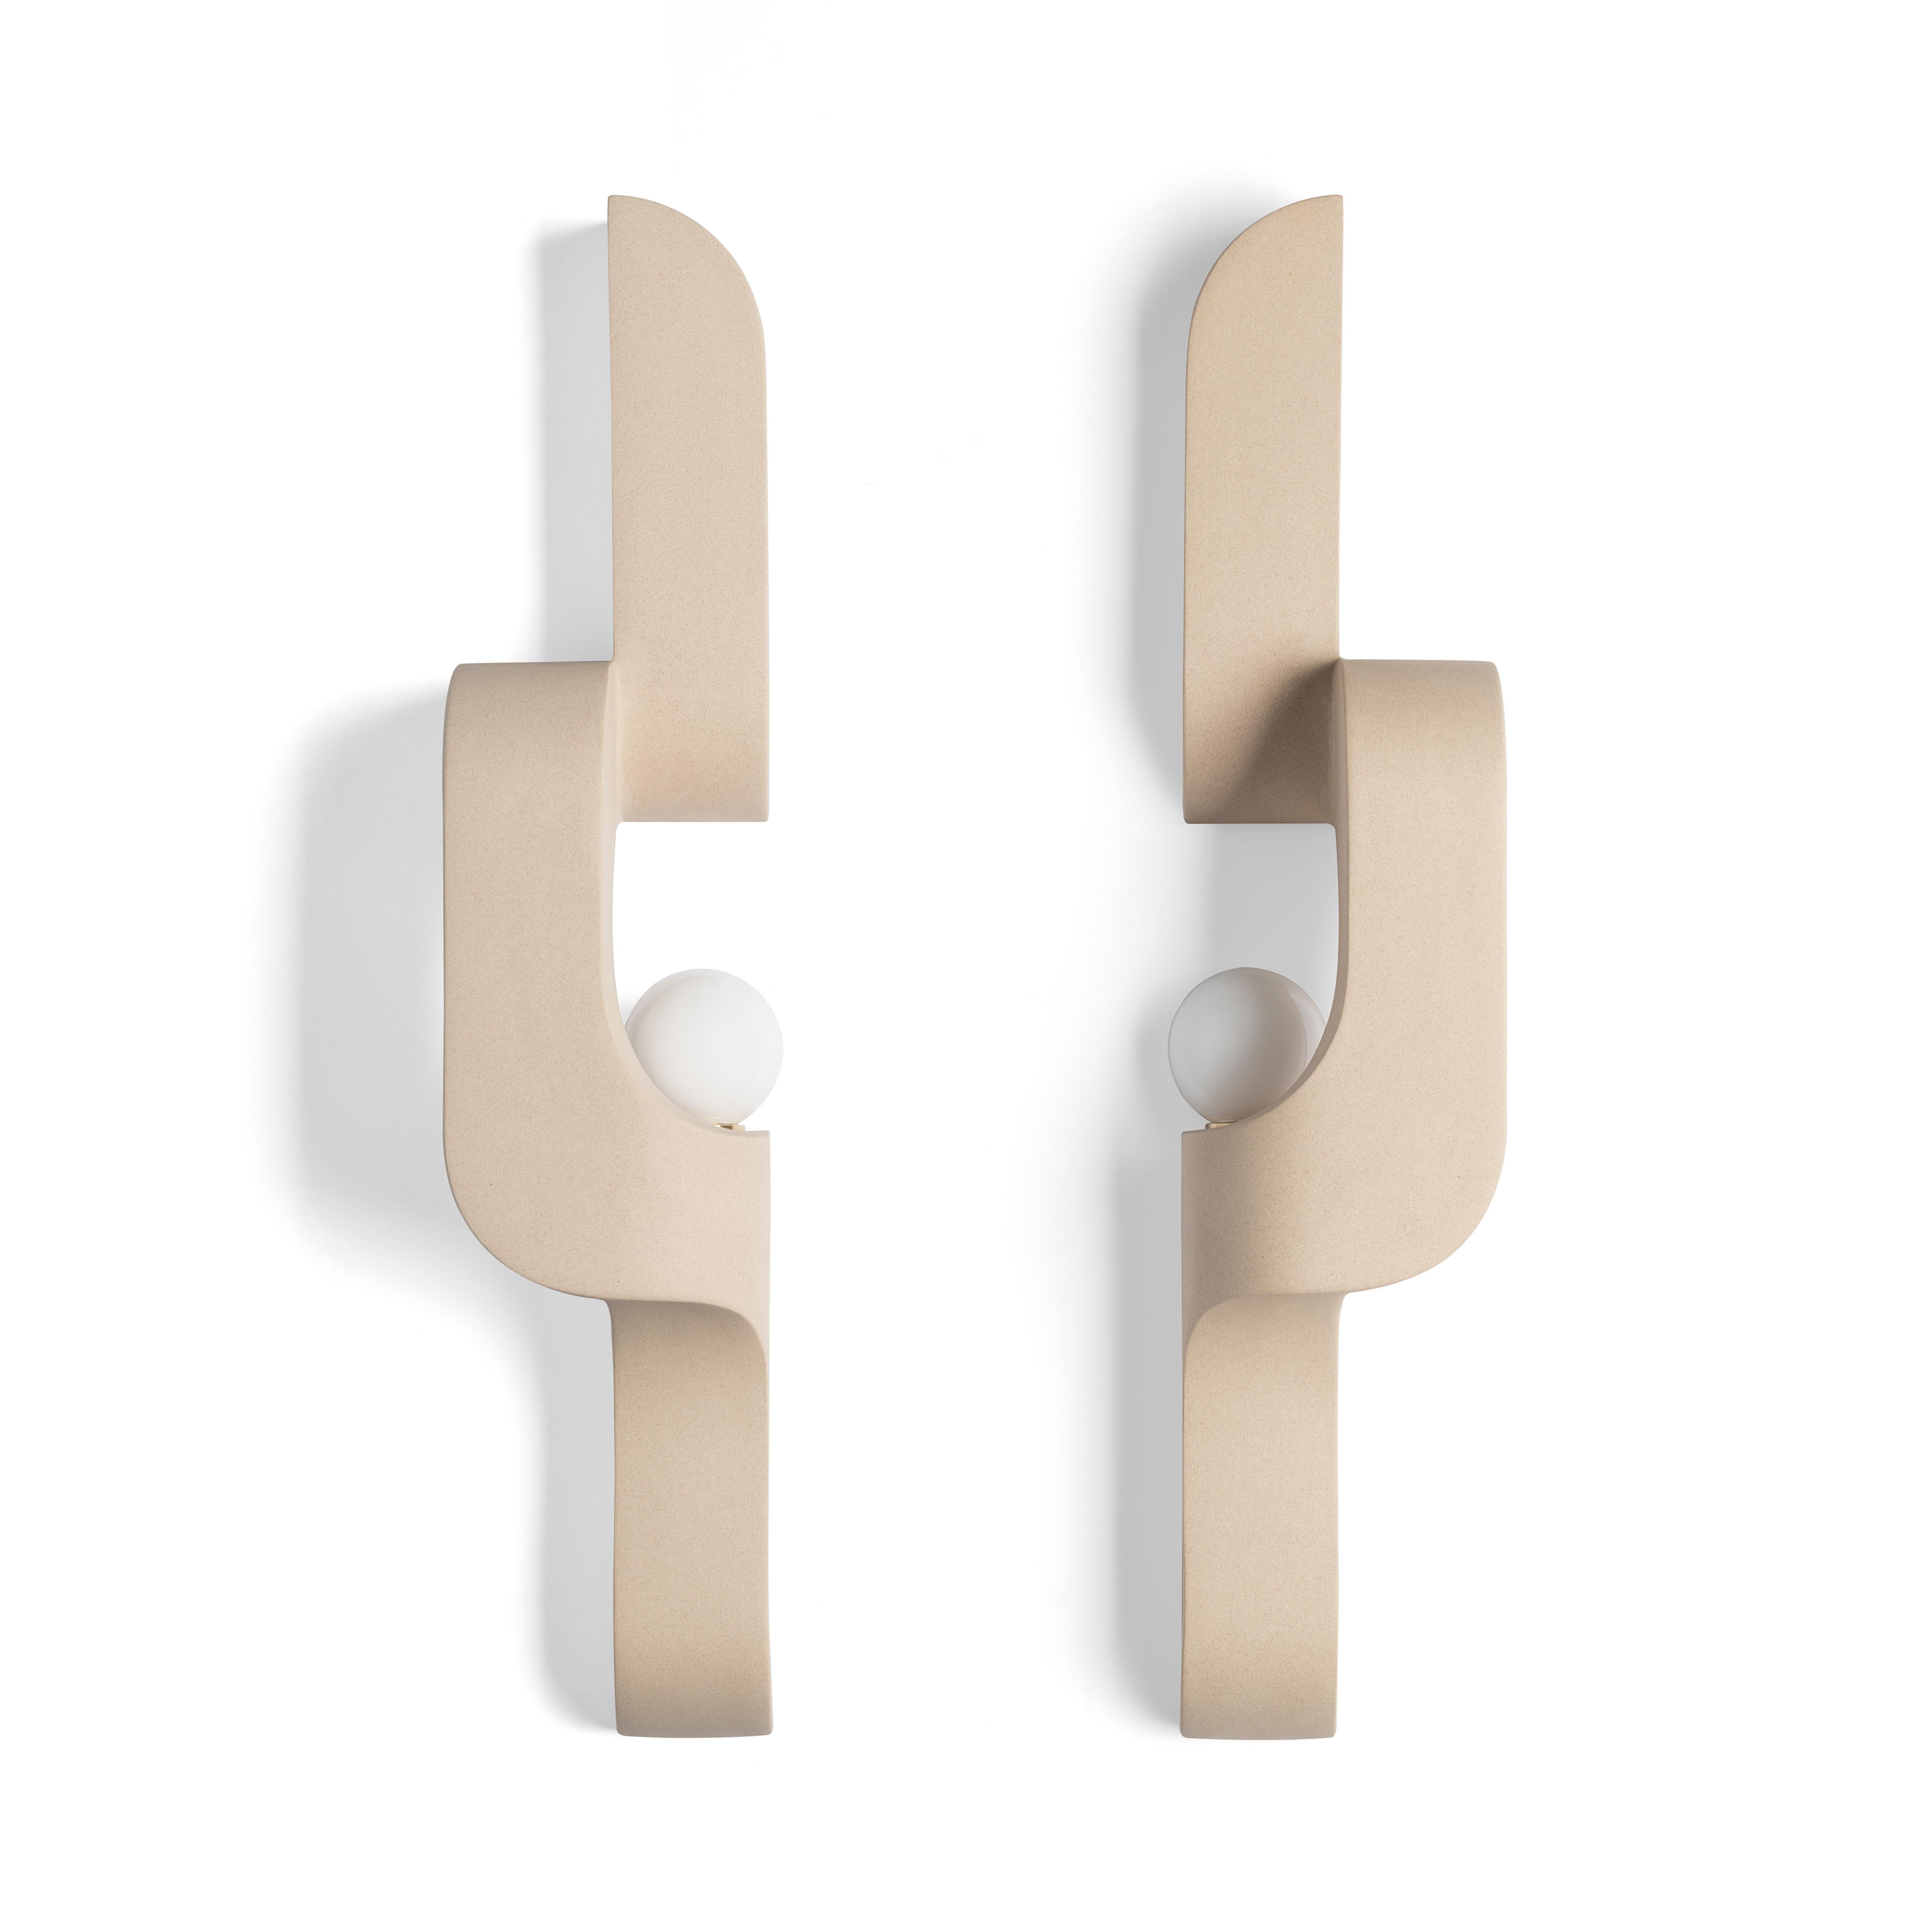 In this ceramic wall sconce, generous curves are paired with crisp edges and the repetition of geometry to create a flow. The sconce snakes up and off the wall, a sculptural lighting piece that's understated, and almost artifact-like. Serpentine is